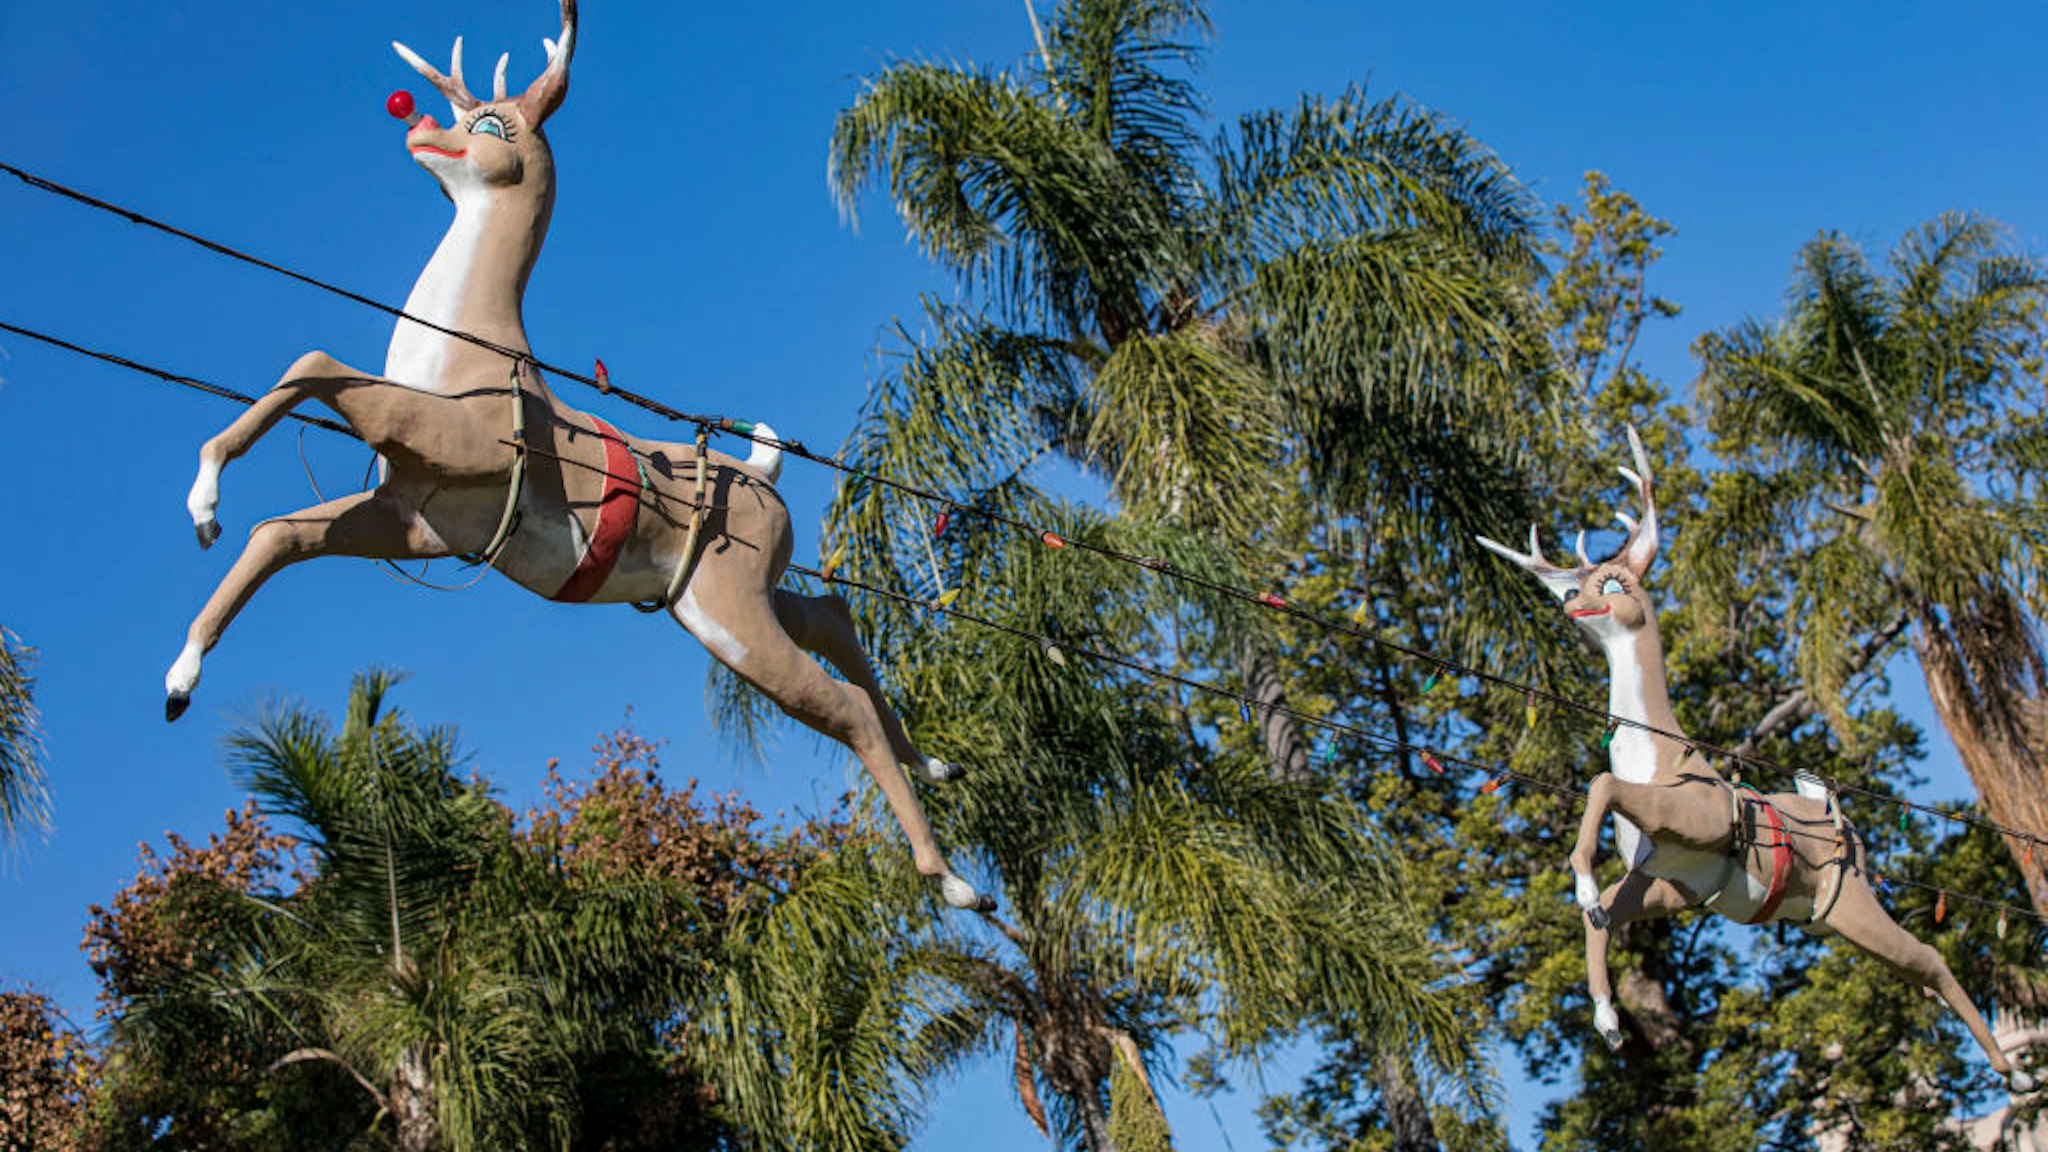 SAN DIEGO, CALIFORNIA - DECEMBER 20: General view of Christmas decorations in Balboa Park on December 20, 2020 in San Diego, California.